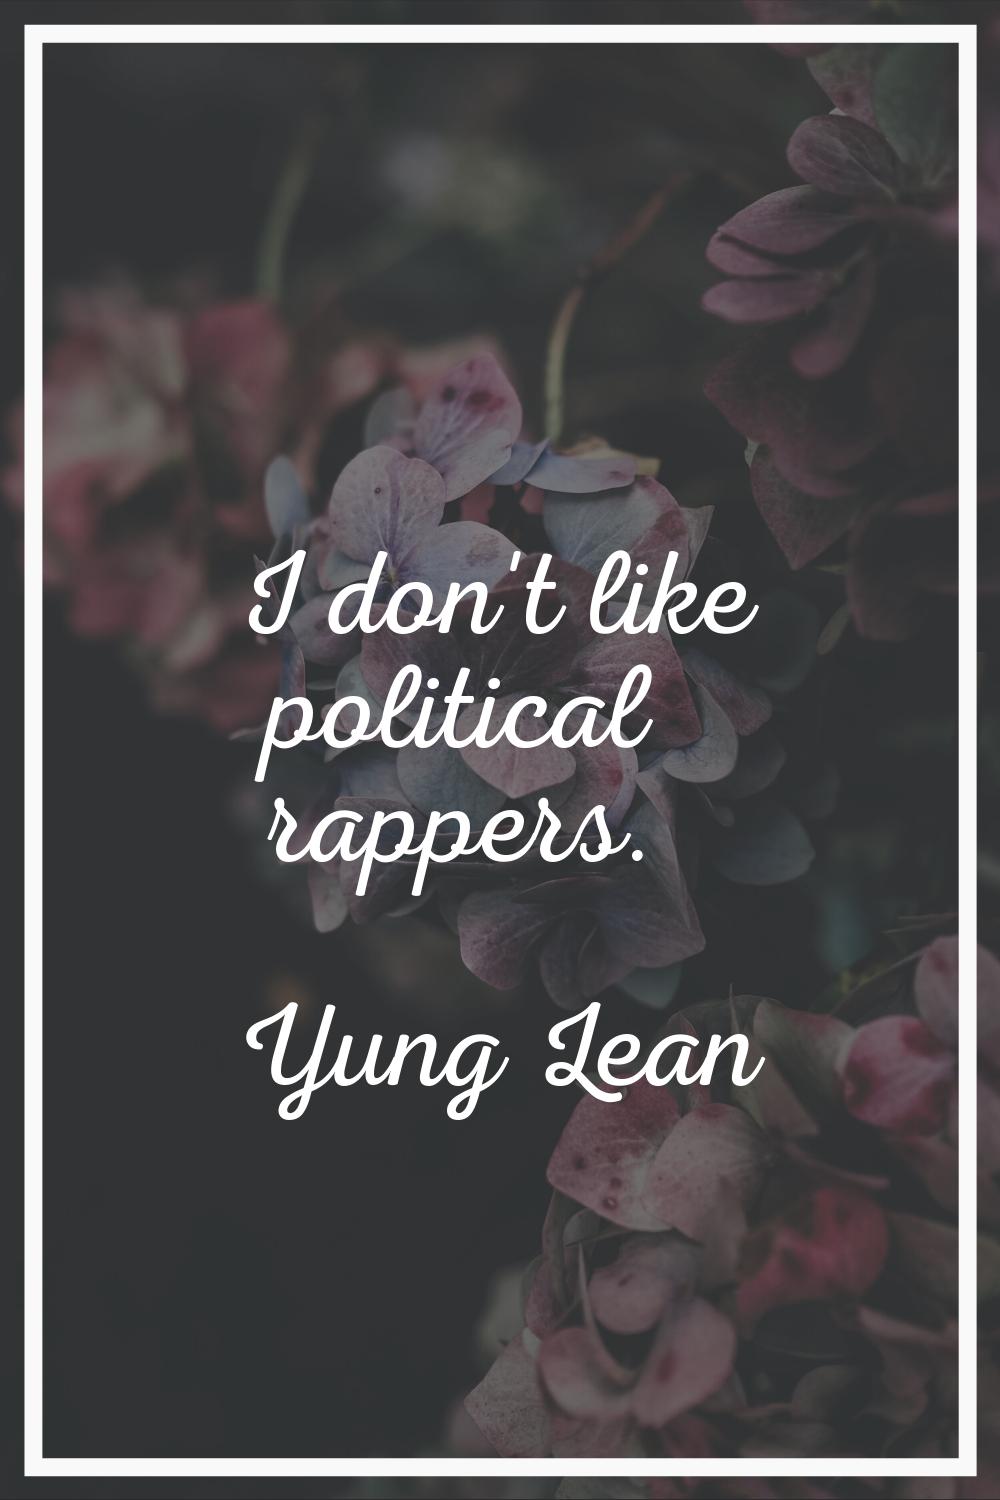 I don't like political rappers.